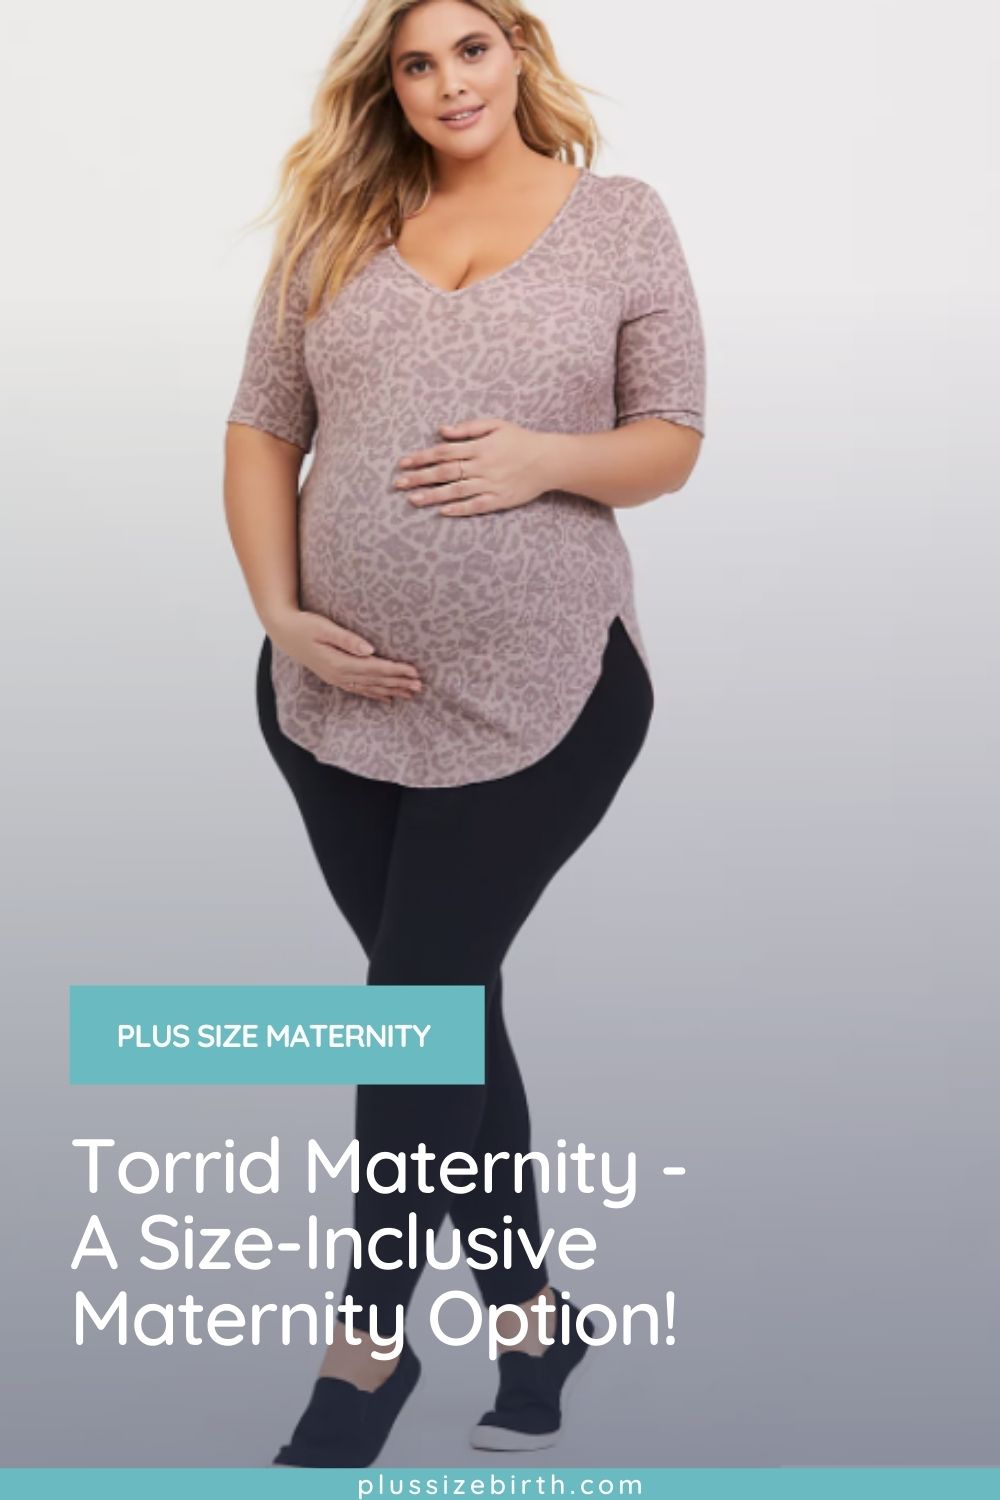 Torrid Maternity - A Size-Inclusive Maternity Option!